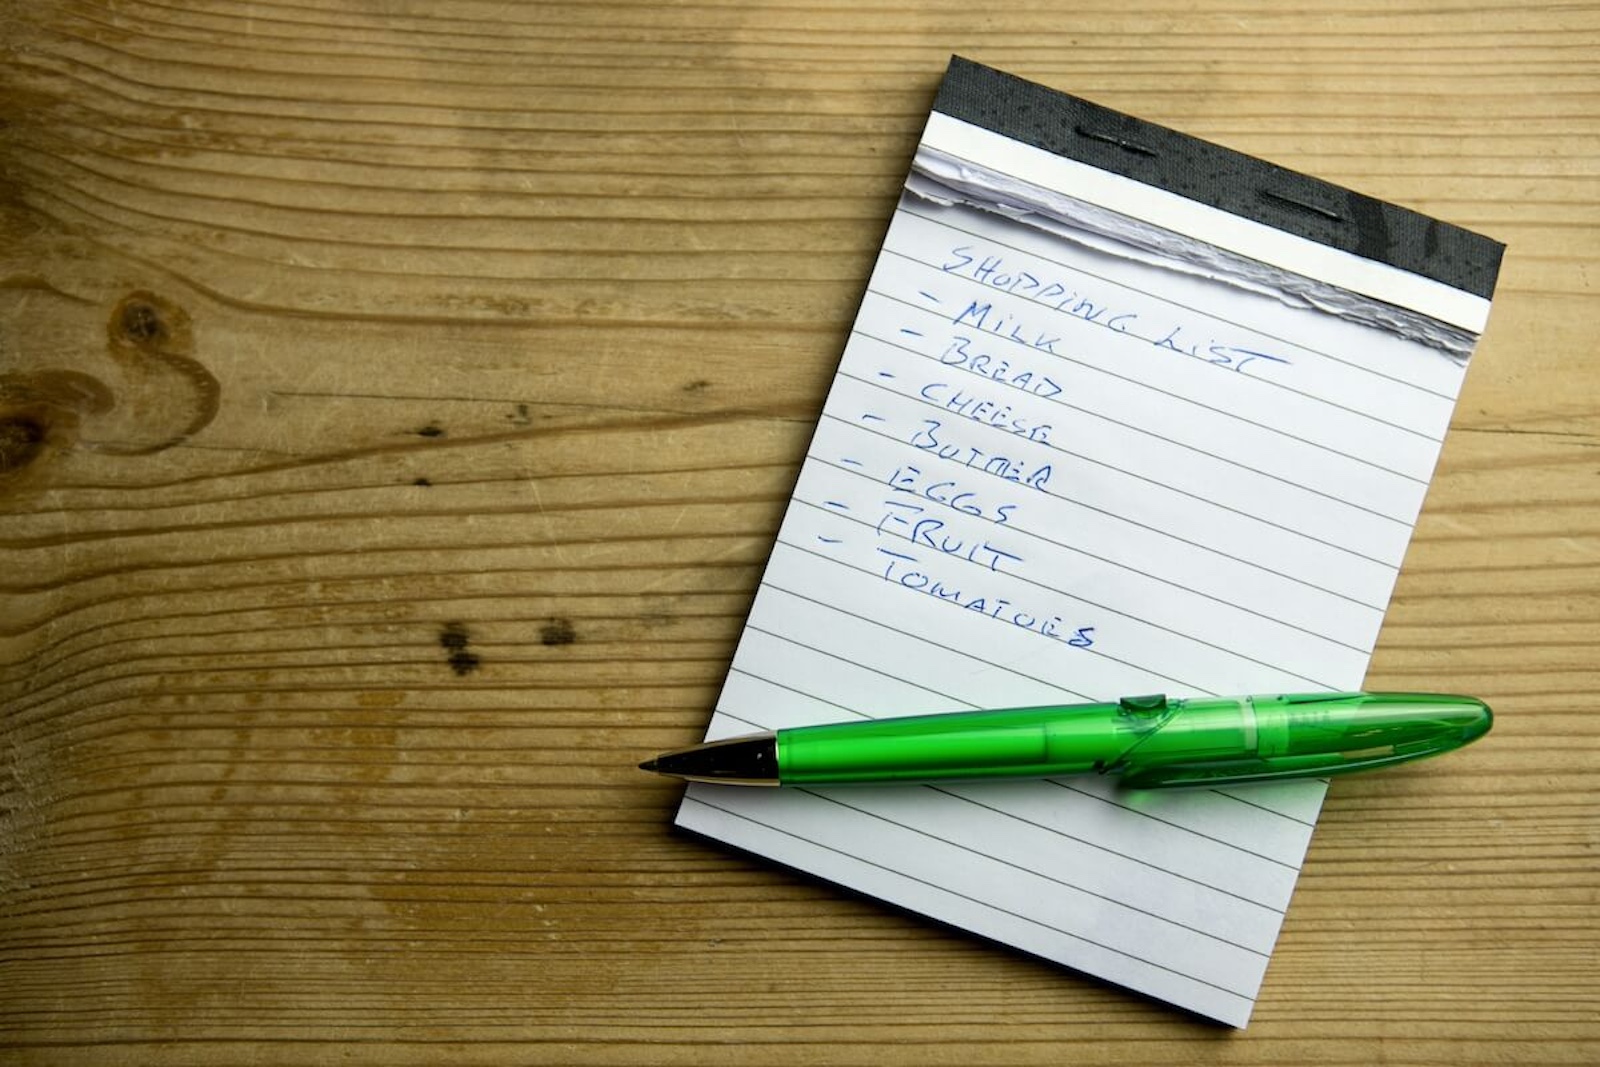 This image showcases a hand holding a mobile device with a shopping list displayed on a pink sticky note. The list includes essential grocery items, providing a relatable glimpse into the familiar task of preparing for a shopping trip. In context, it references the importance of grammar when making lists. 